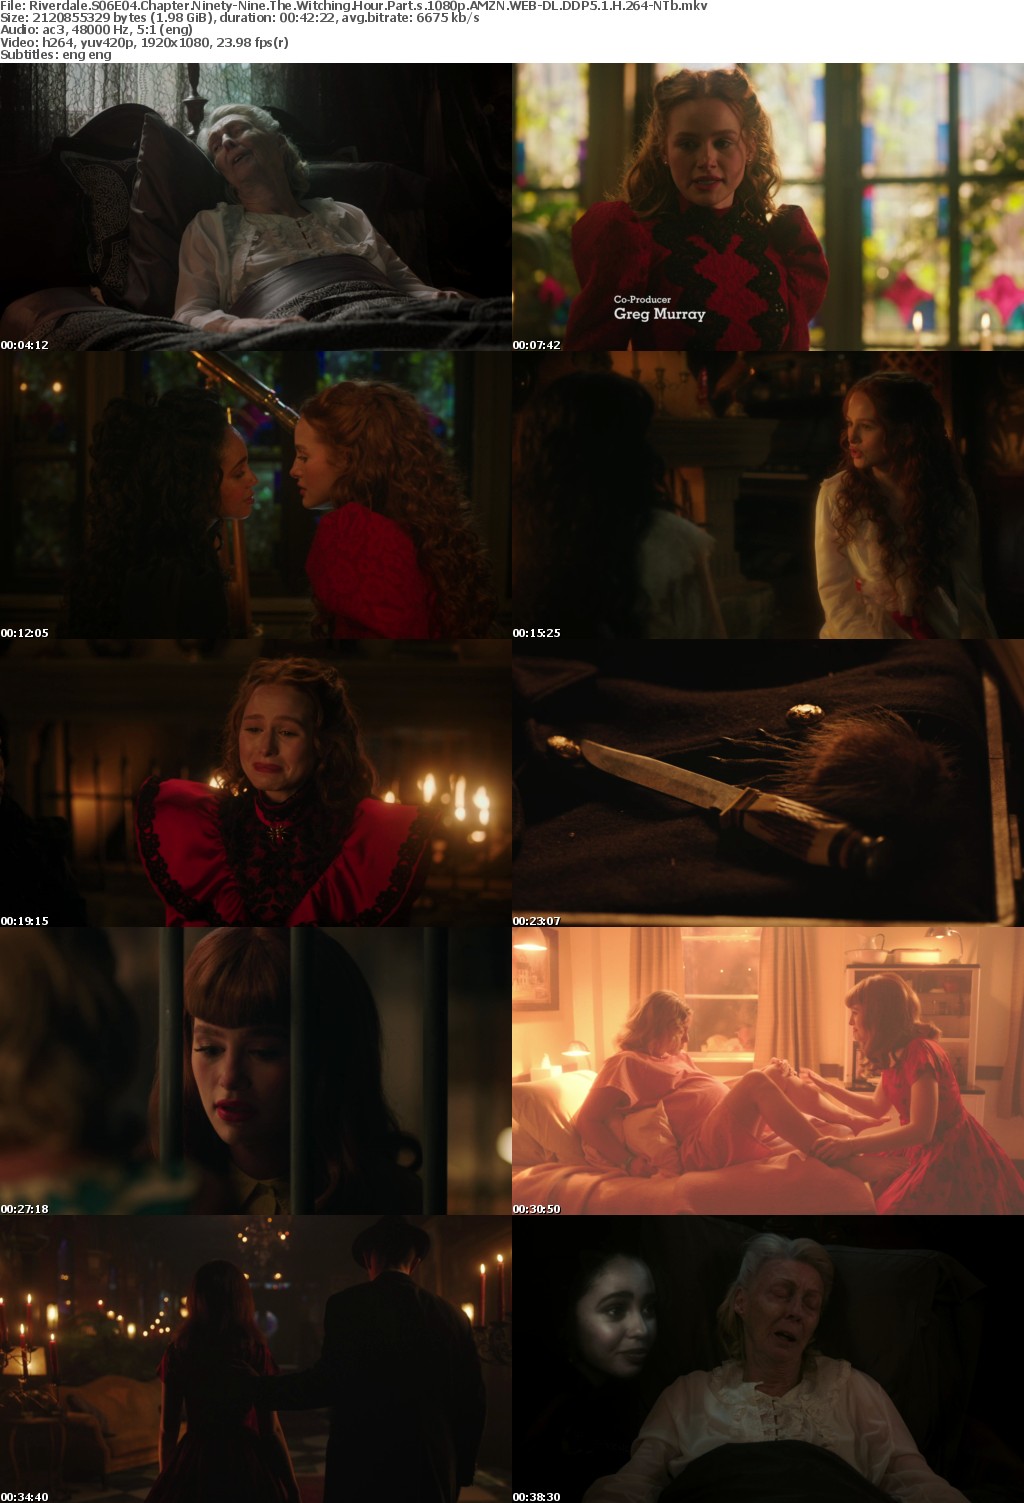 Riverdale US S06E04 Chapter Ninety-Nine The Witching Hour Part s 1080p AMZN WEBRip DDP5 1 x264-NTb